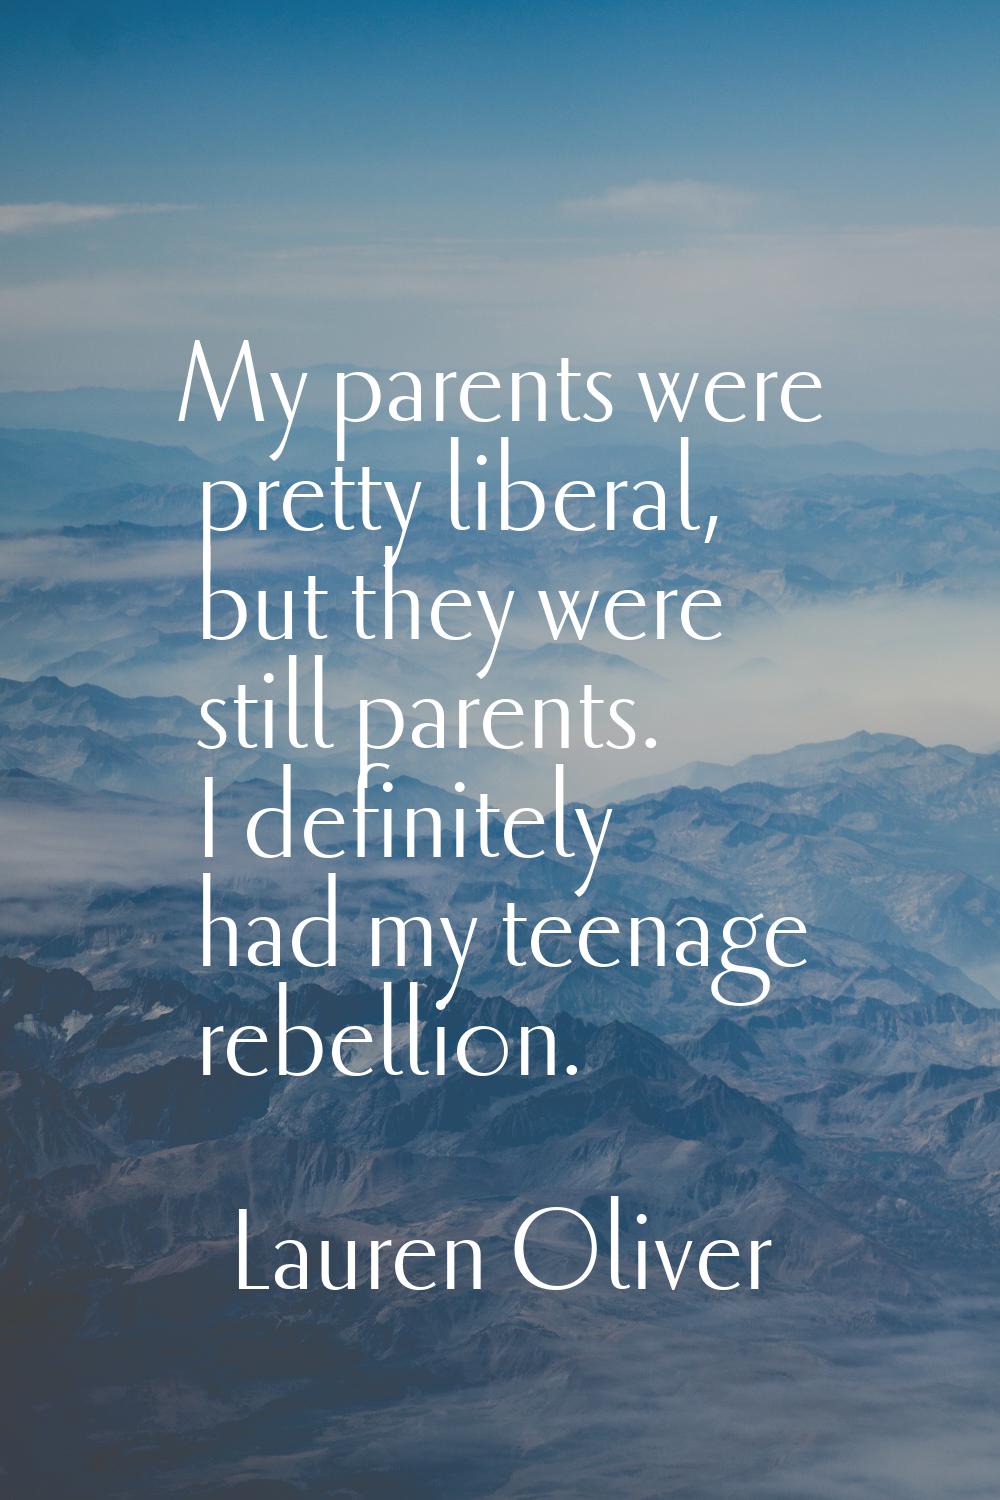 My parents were pretty liberal, but they were still parents. I definitely had my teenage rebellion.